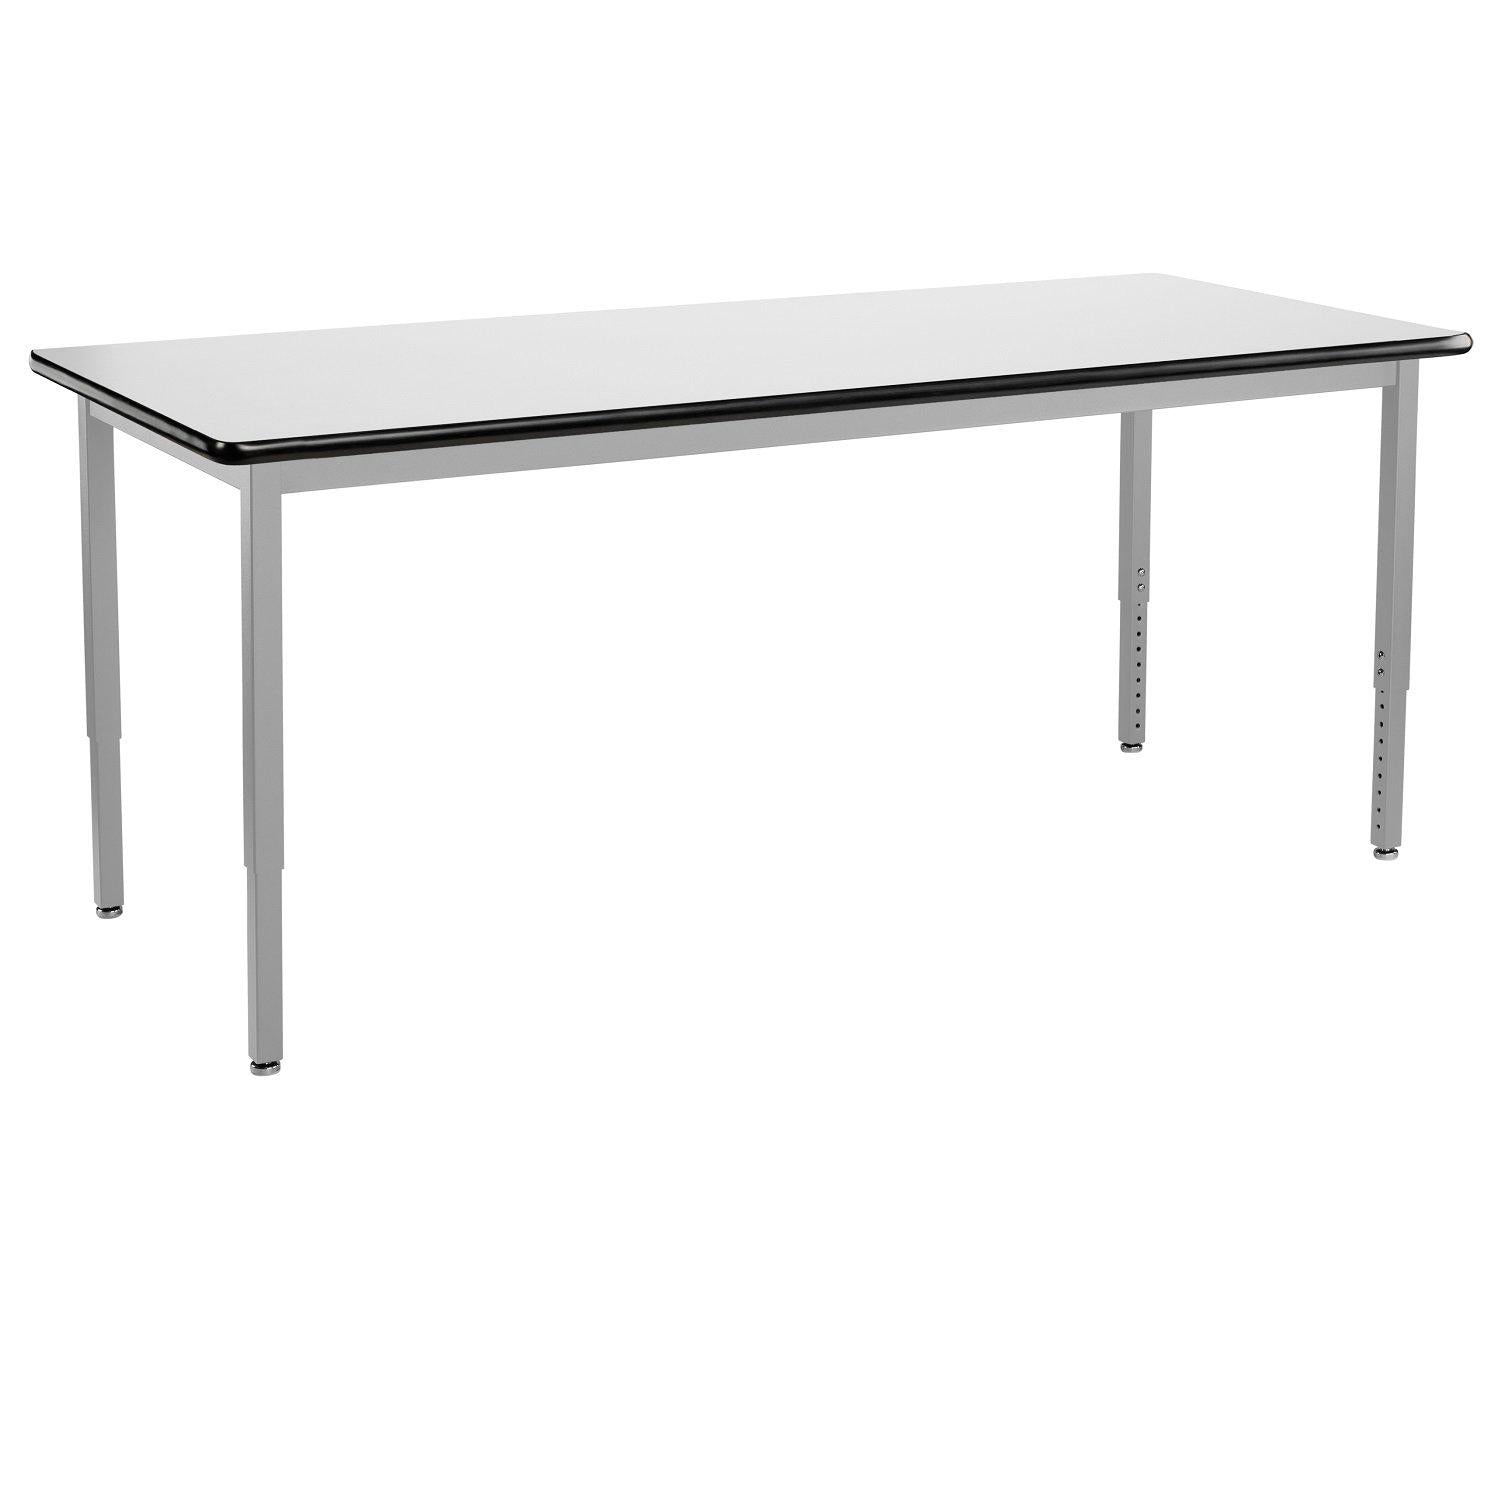 Heavy-Duty Height-Adjustable Utility Table, Soft Grey Frame, 30" x 96", Whiteboard High-Pressure Laminate Top